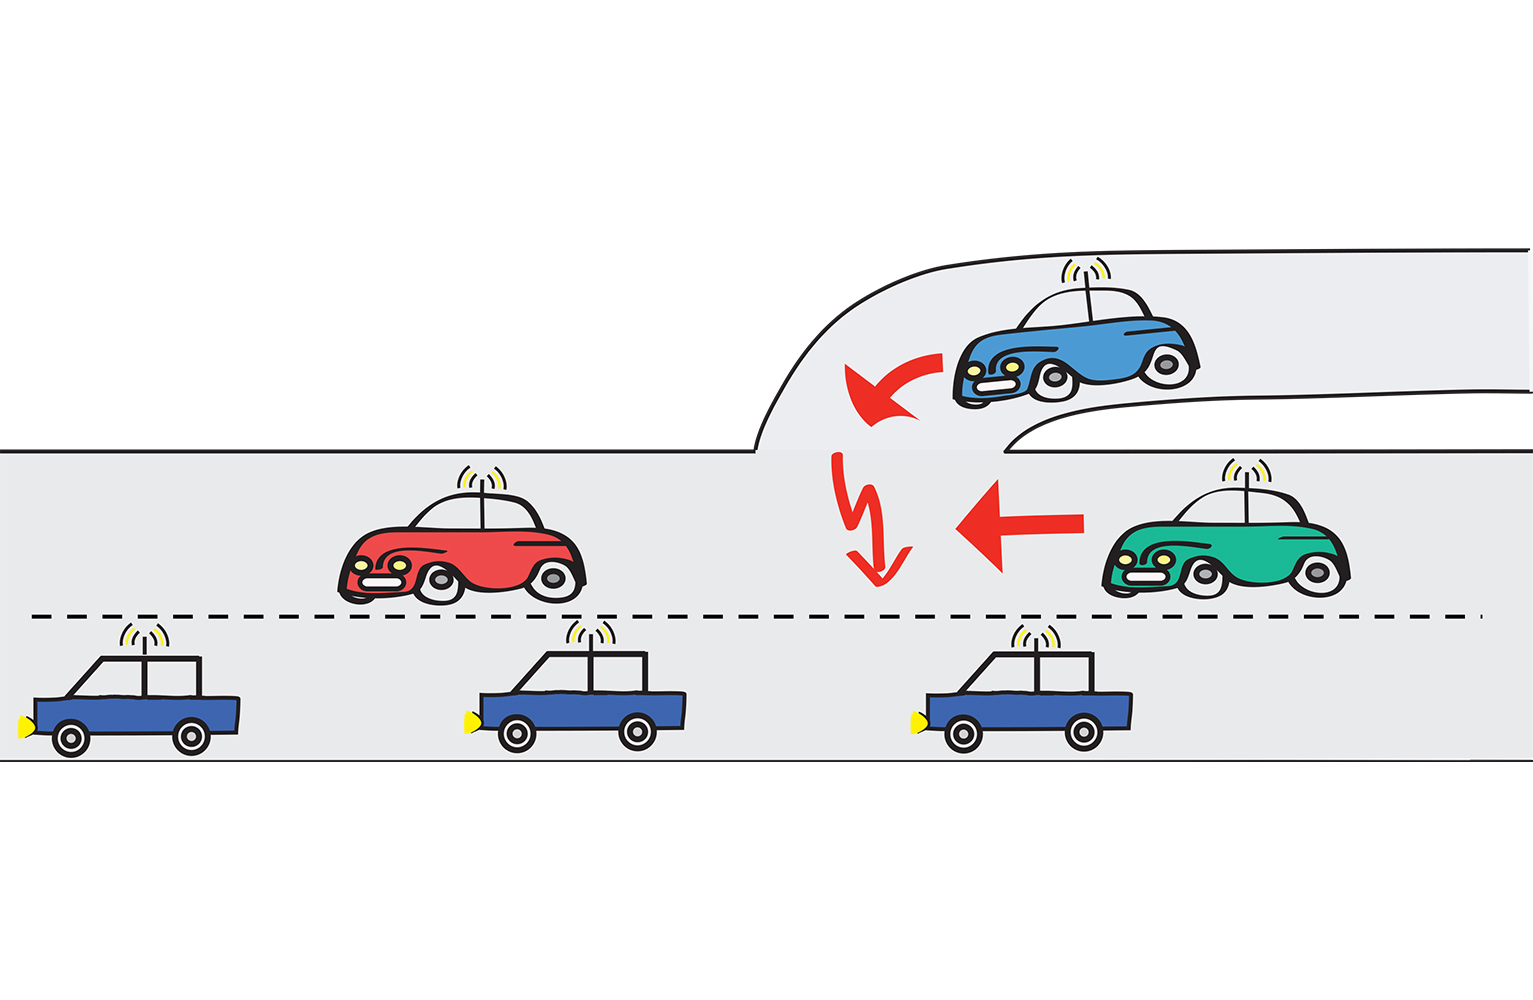 Illustration of cars on a road with an onramp whose motion must not cause a collision